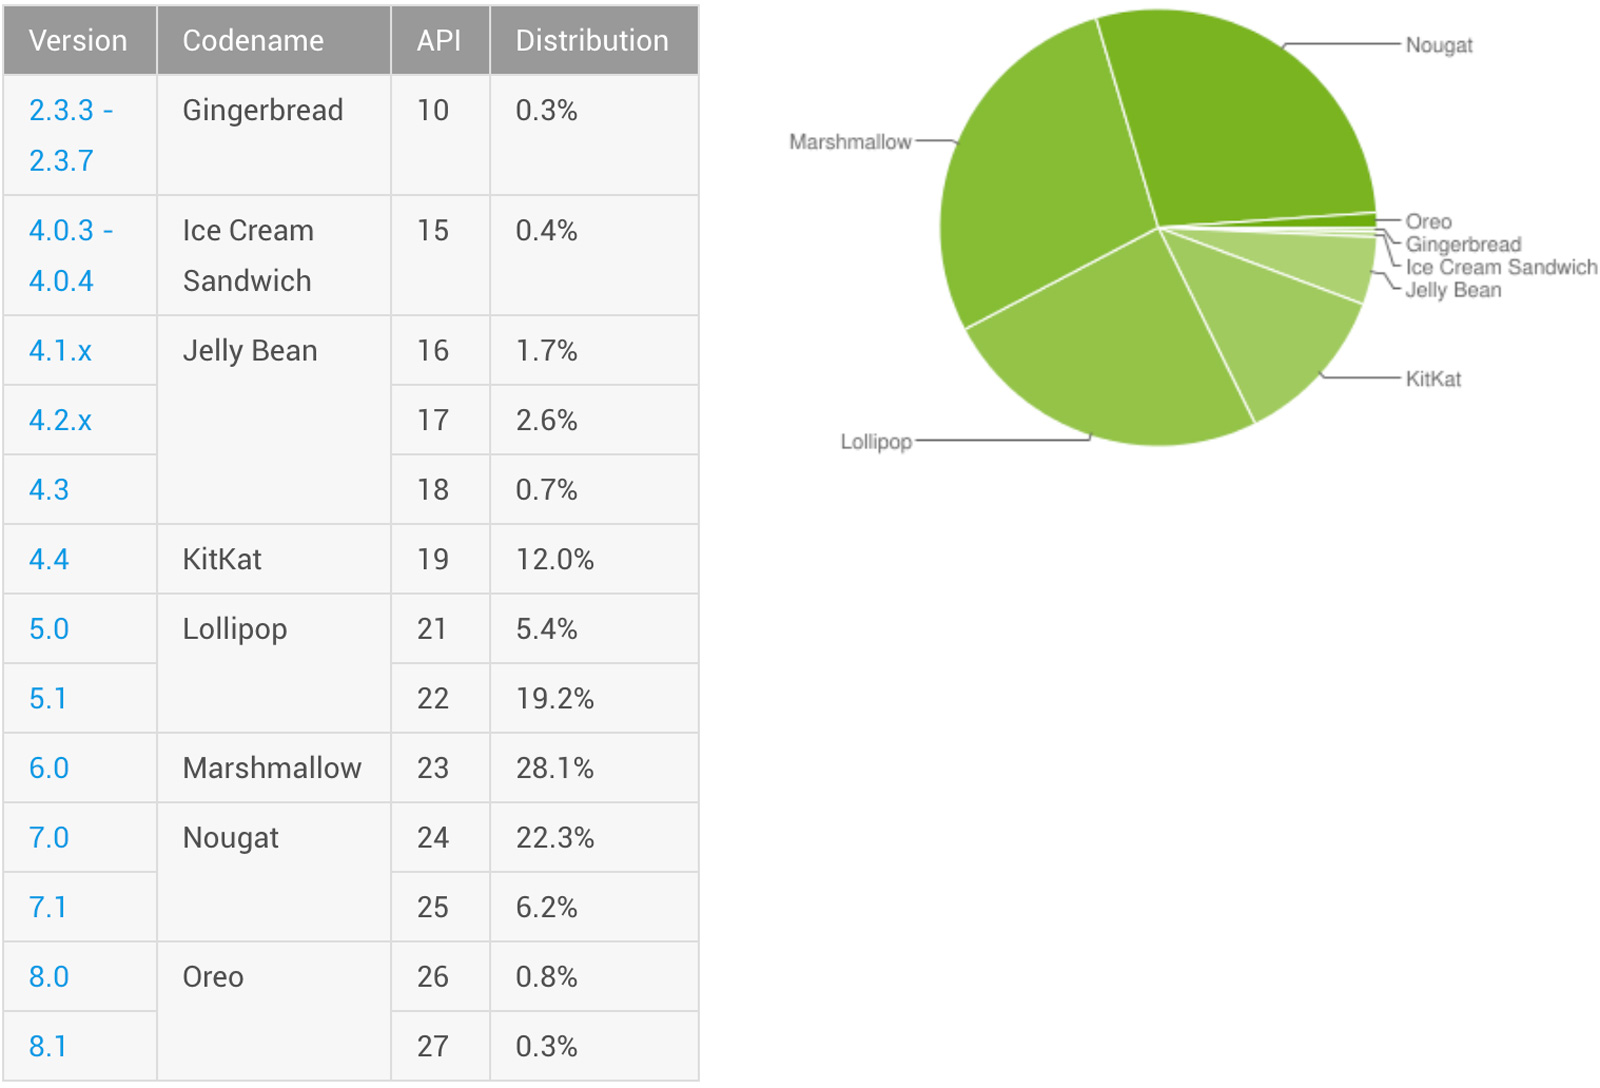 Android version user share, February 2018